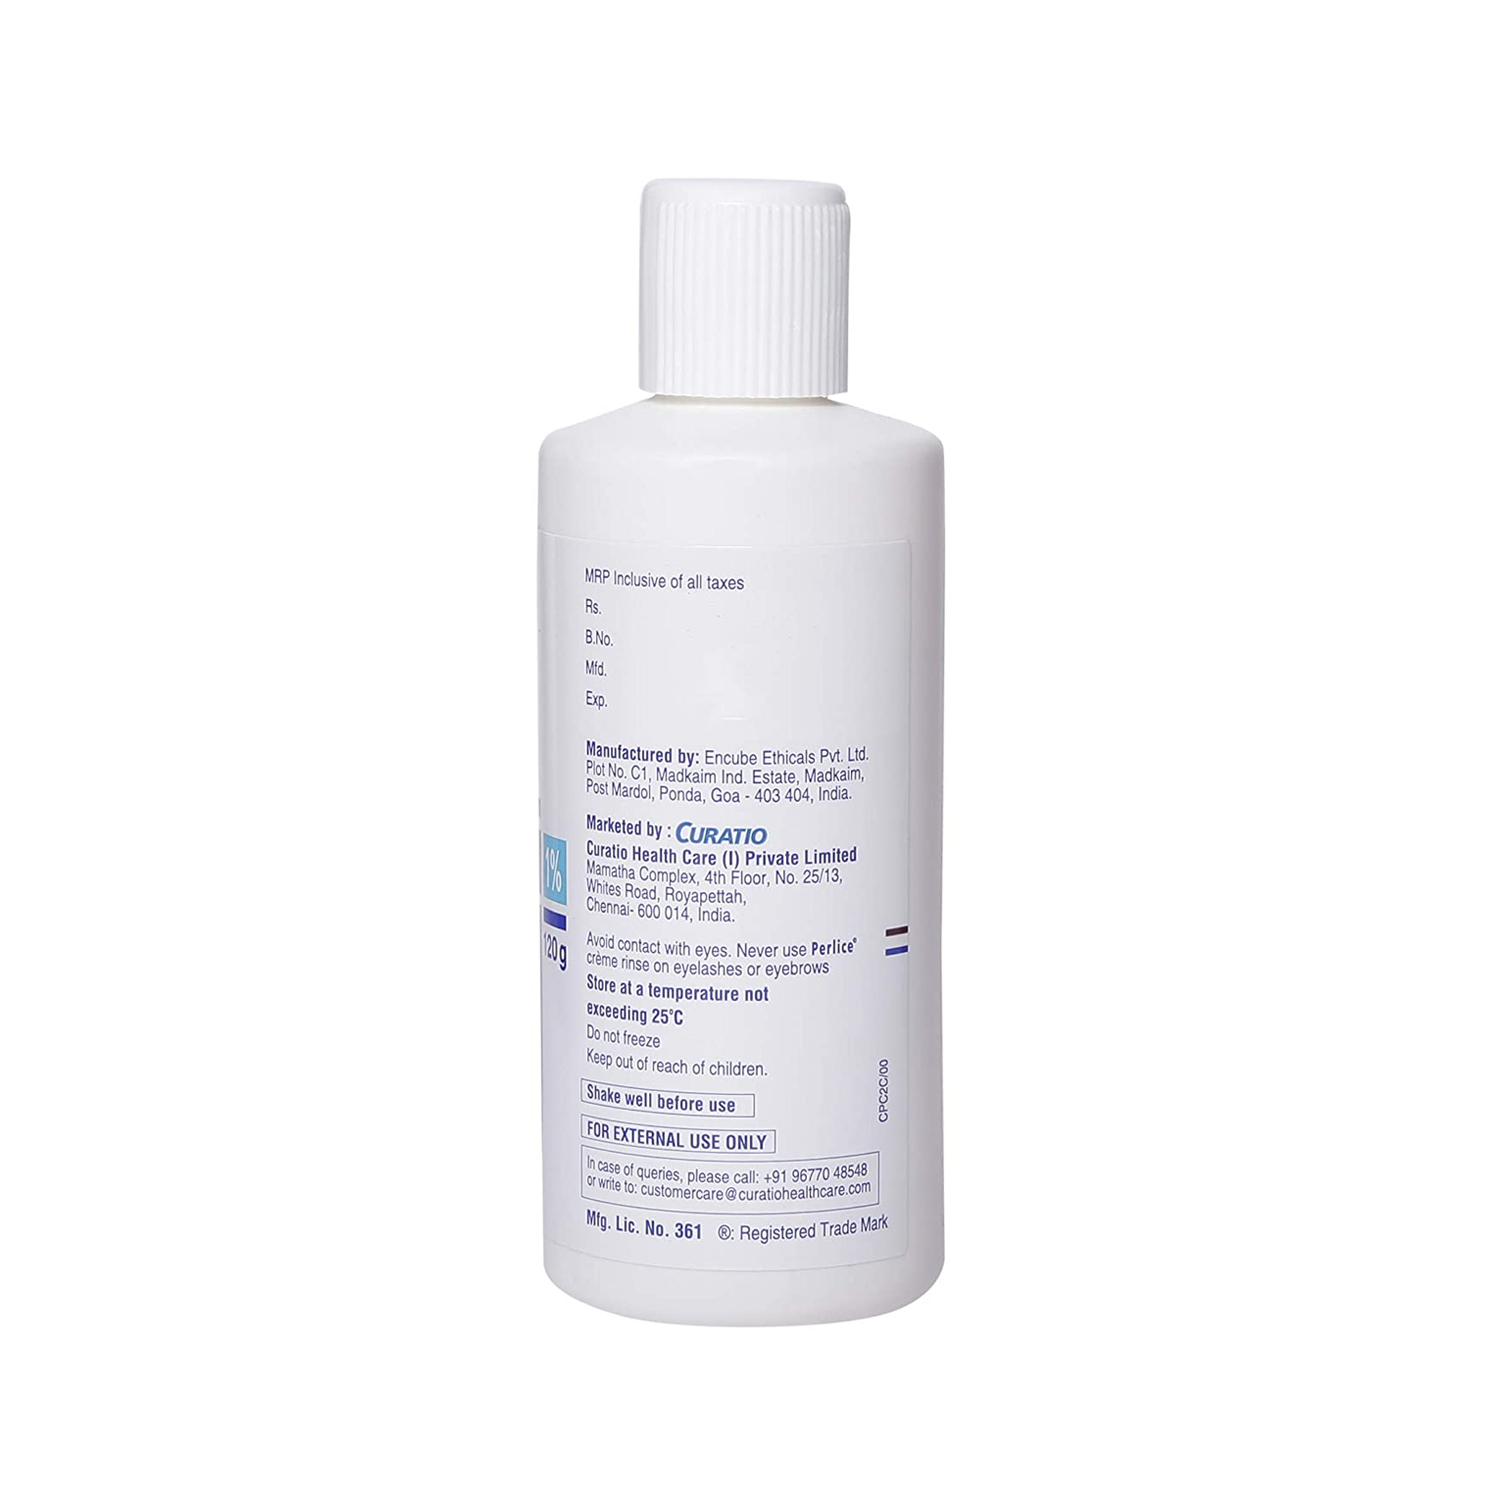 MX 2 Topical Solution 60ml  Buy Medicines online at Best Price from  Netmedscom